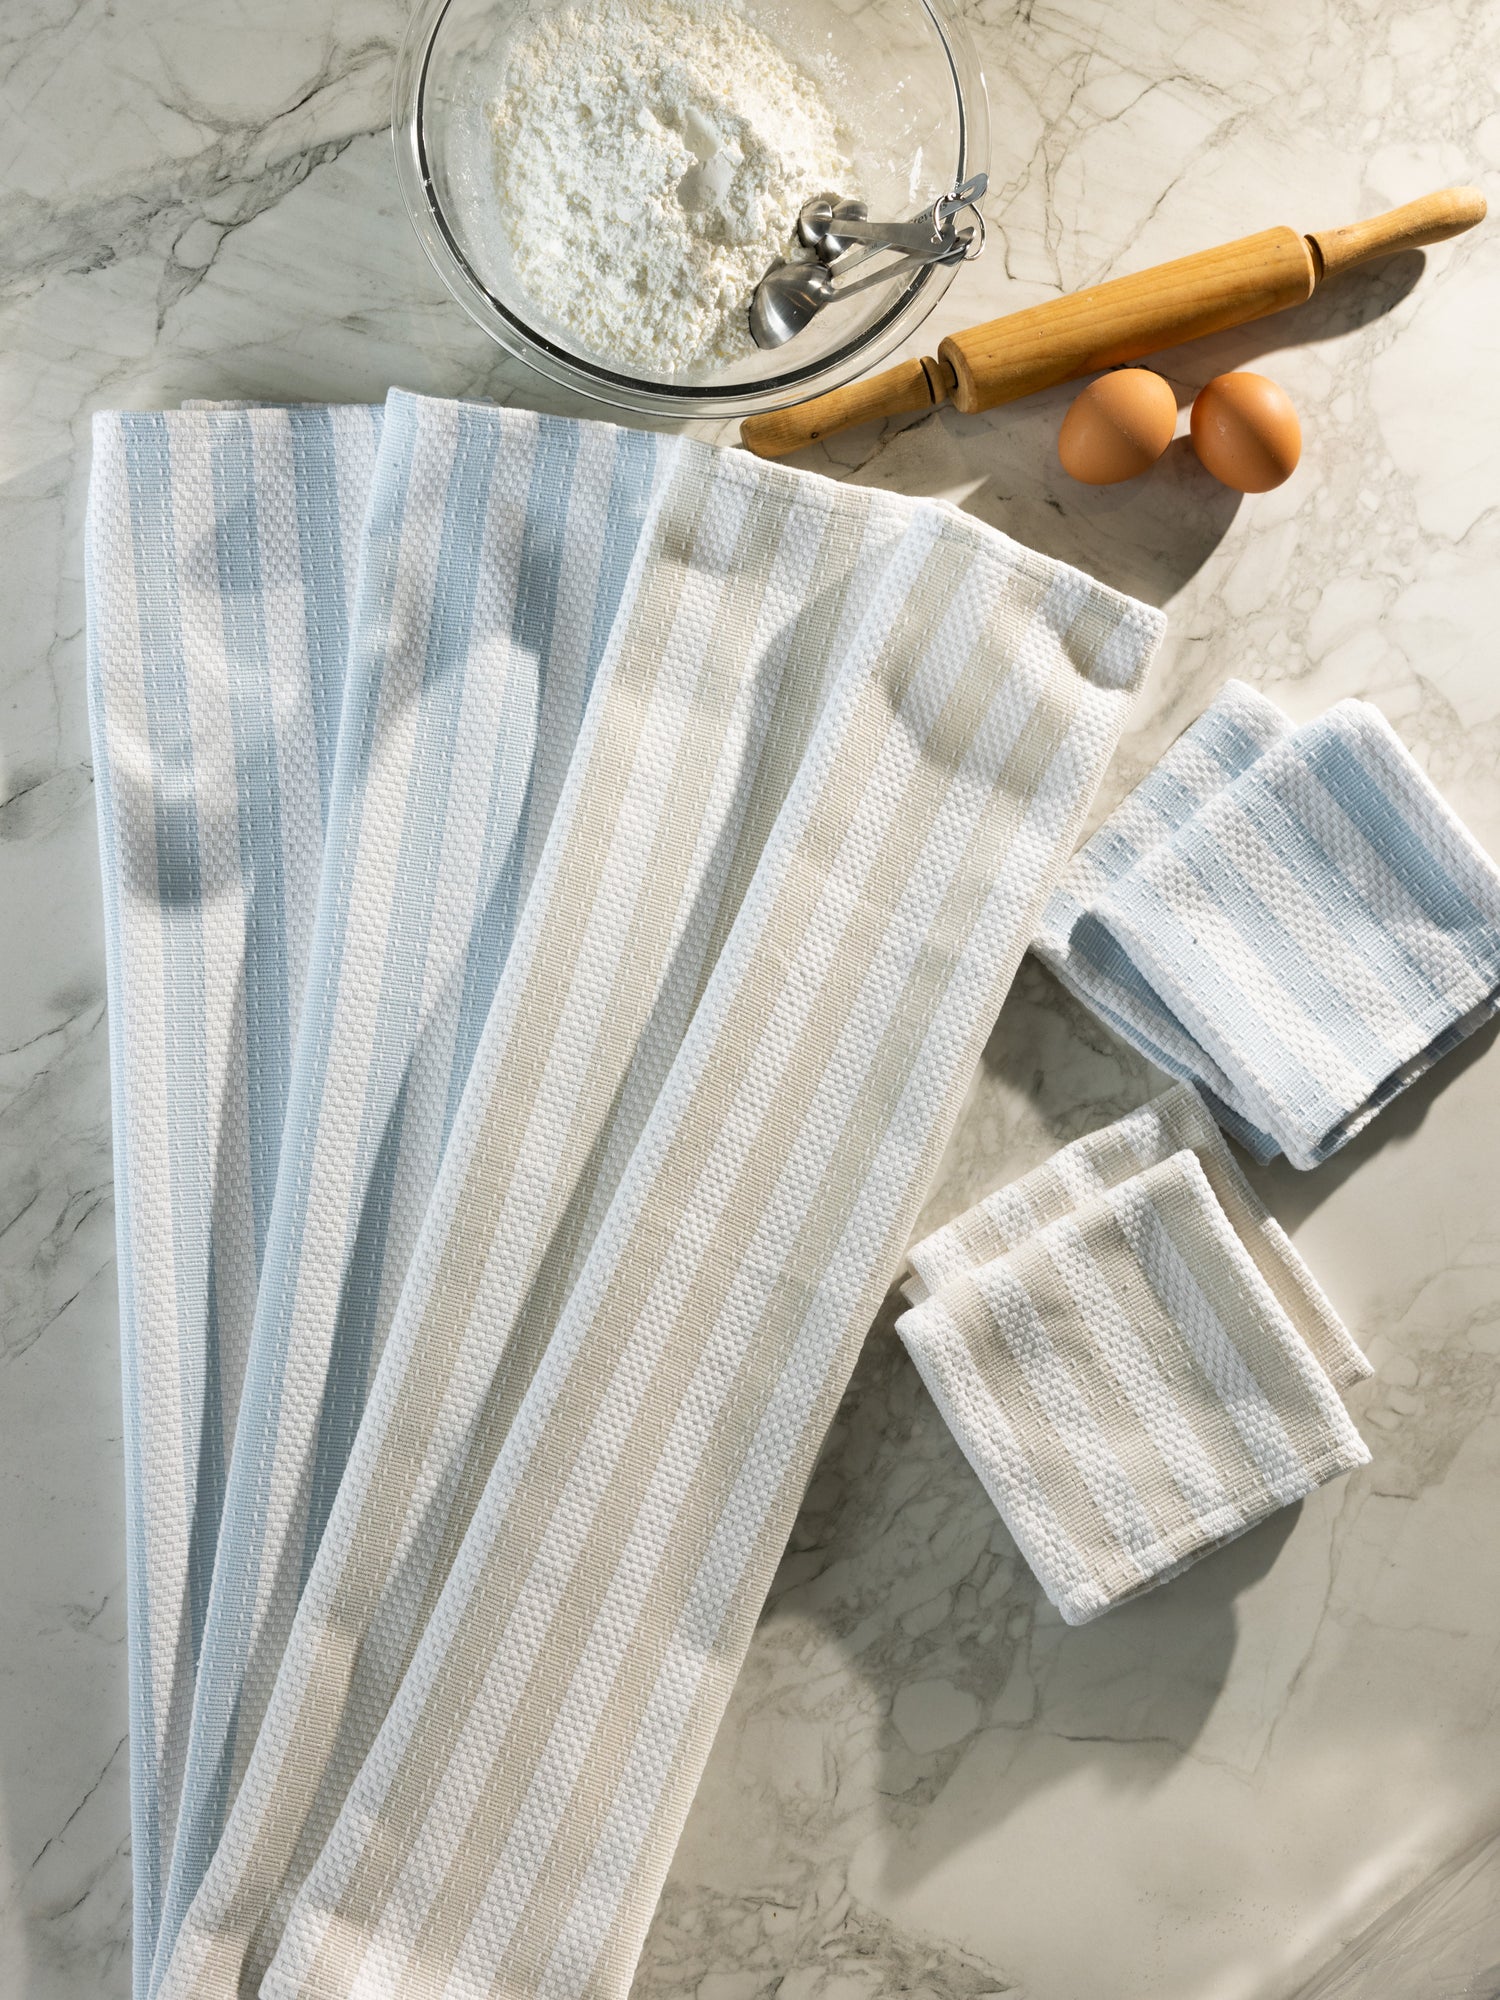 https://www.wallacecotton.com/content/products/wc-stripe-tea-towel-set-of-2-sand-white-3-9202.jpg?width=1500